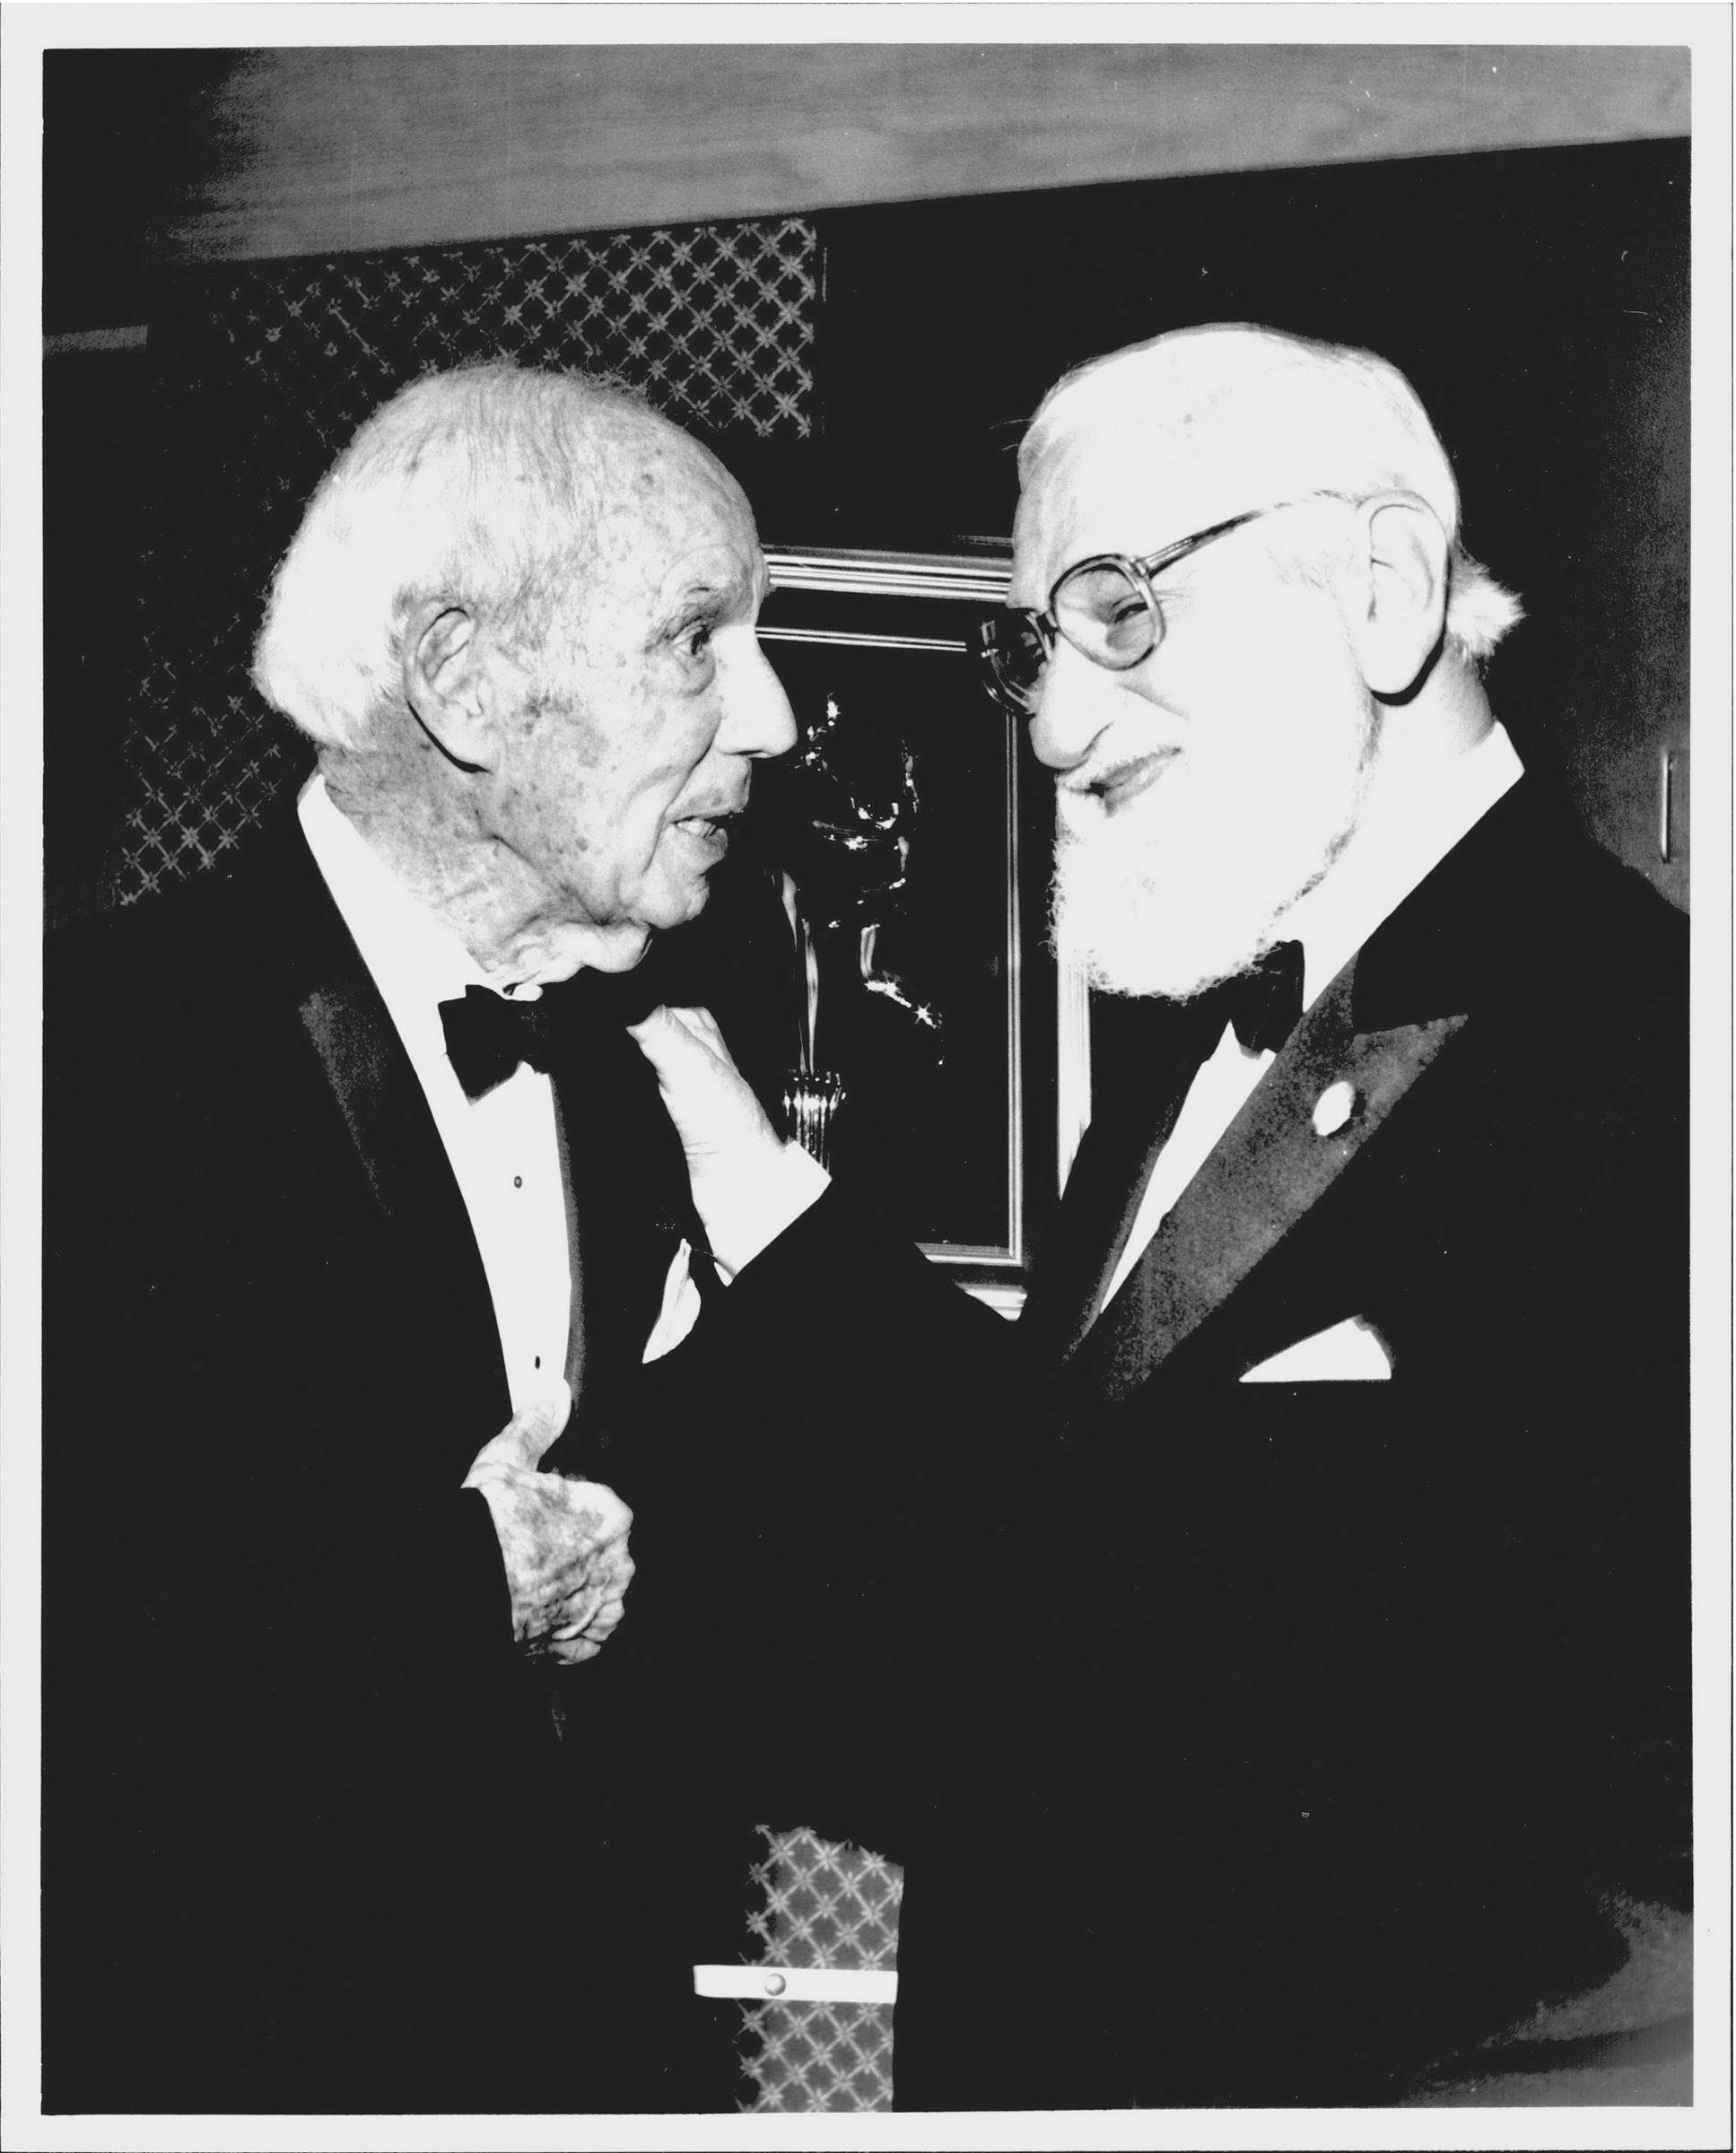 Frederick Hauck, co-founder of the John Hauck Foundation, with Albert Sabin, 1986